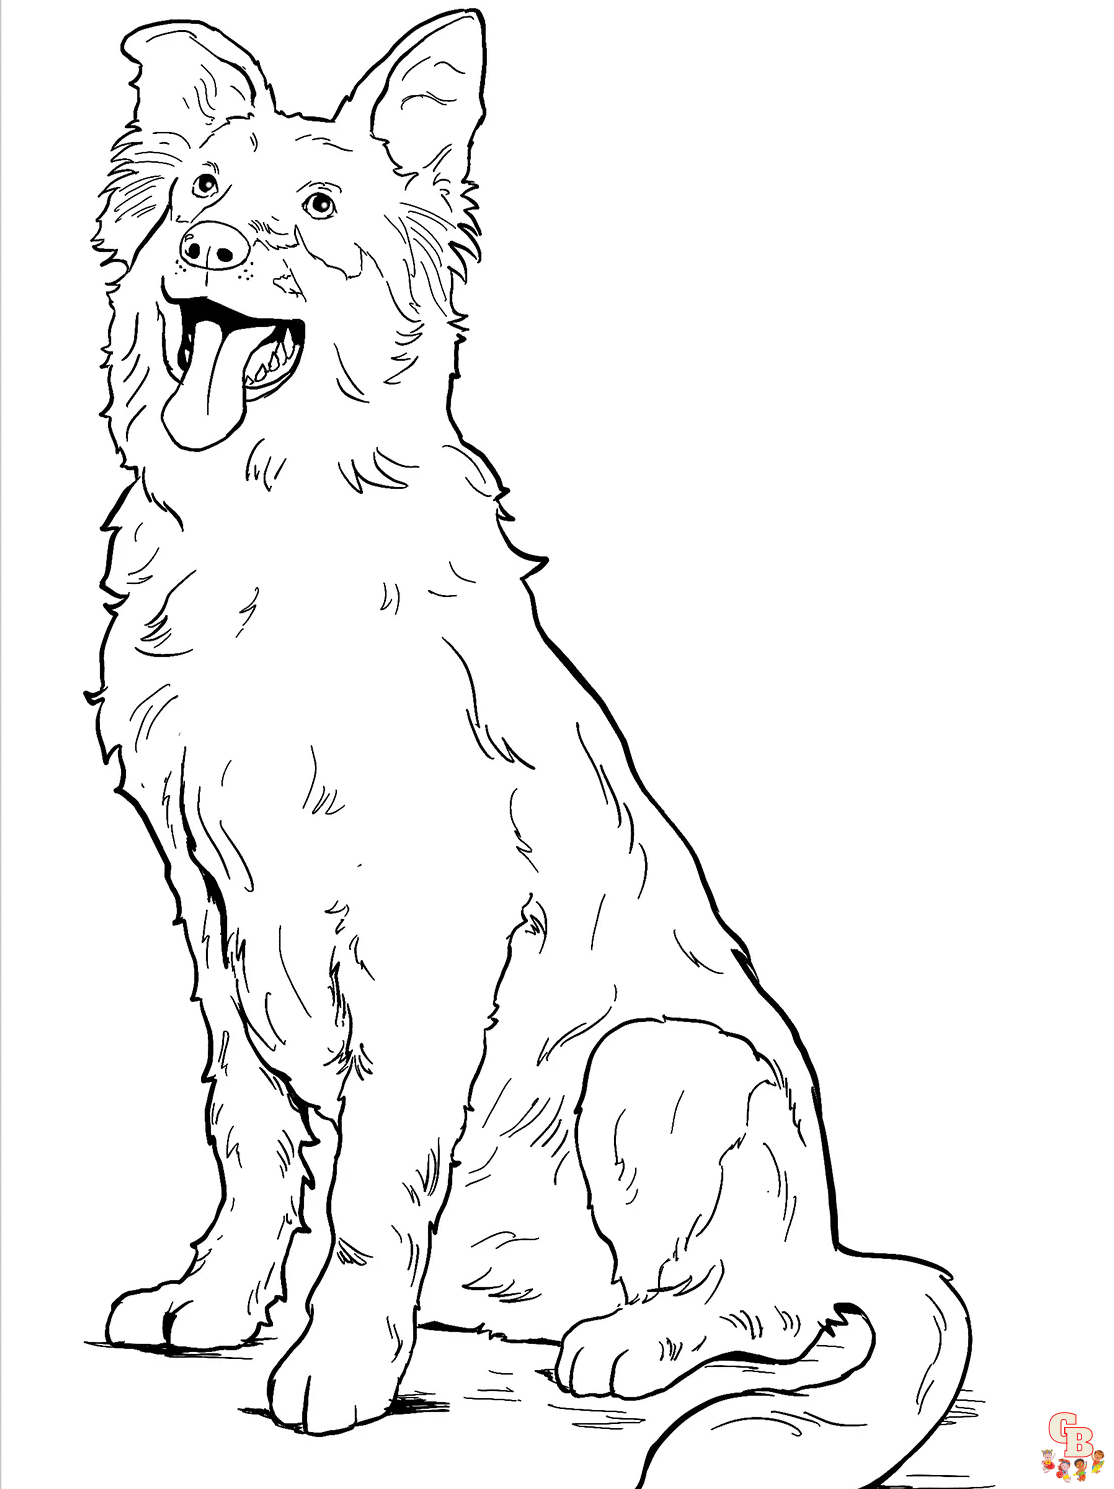 border collie coloring pages